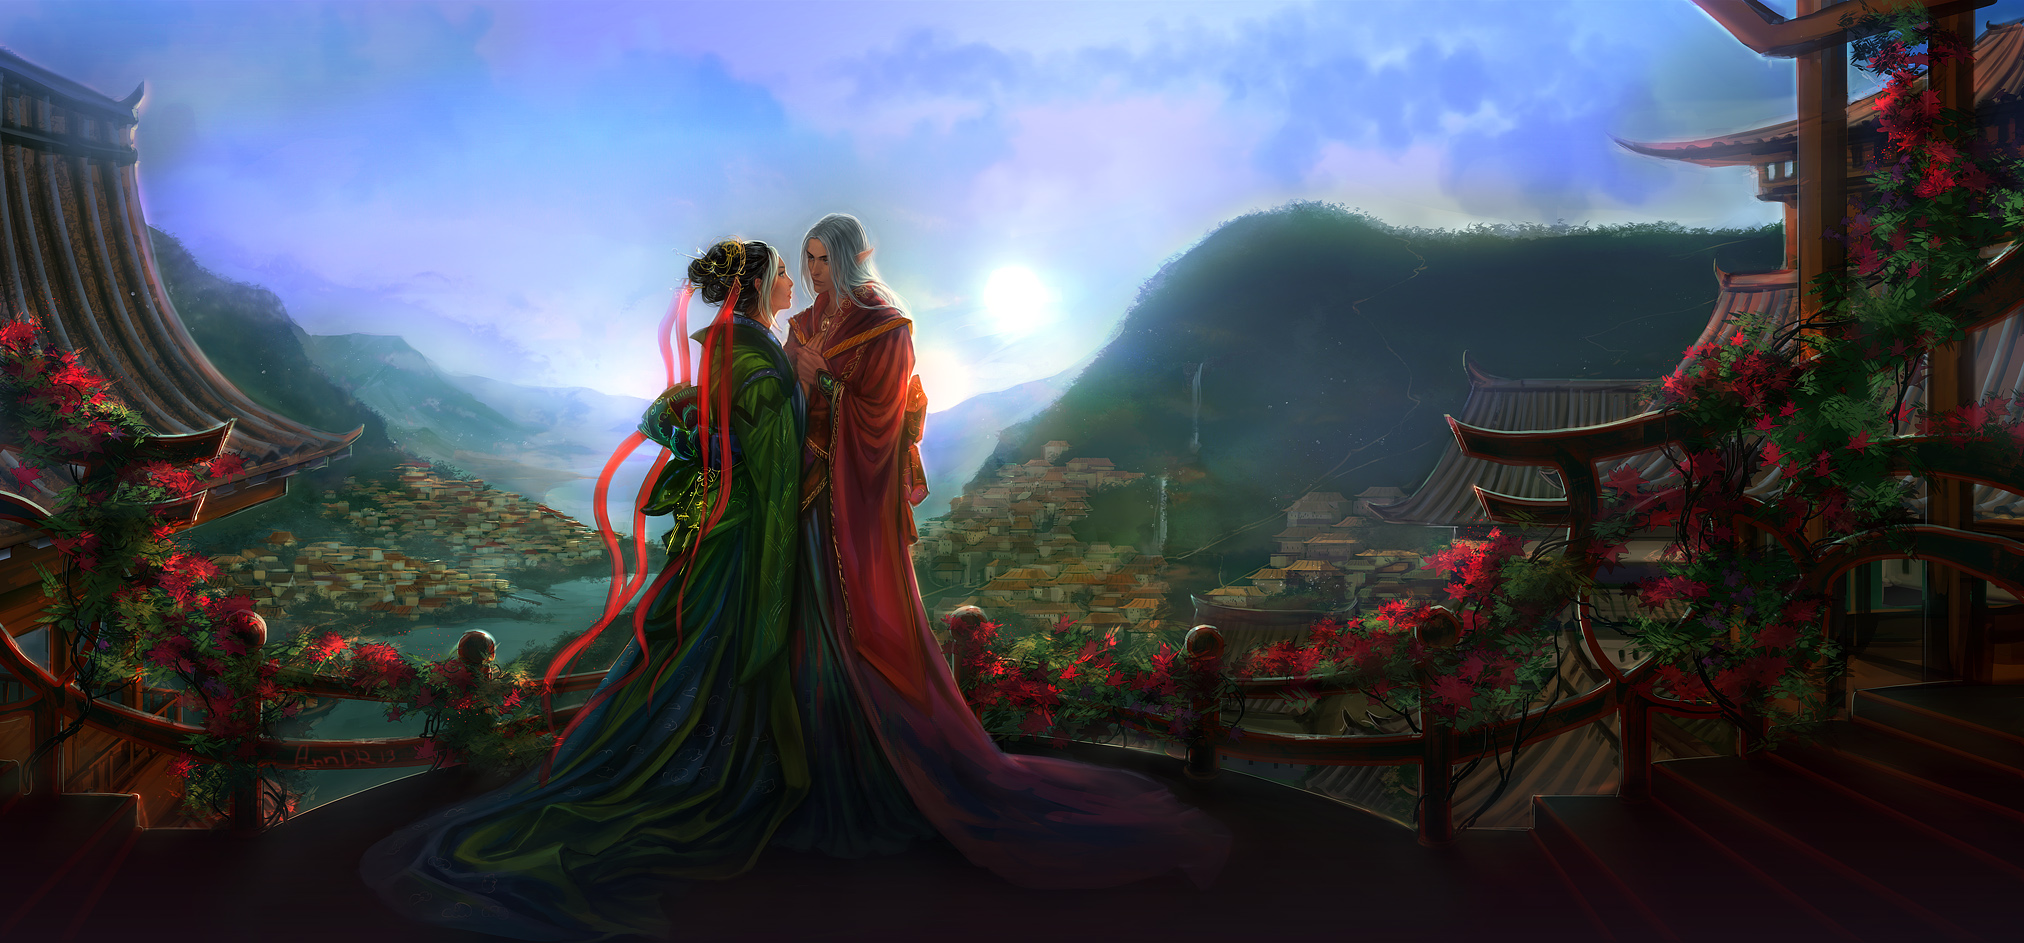 Ancient style couple enjoying cherry blossom chinese style illustration  illustration image_picture free download 402424823_lovepik.com